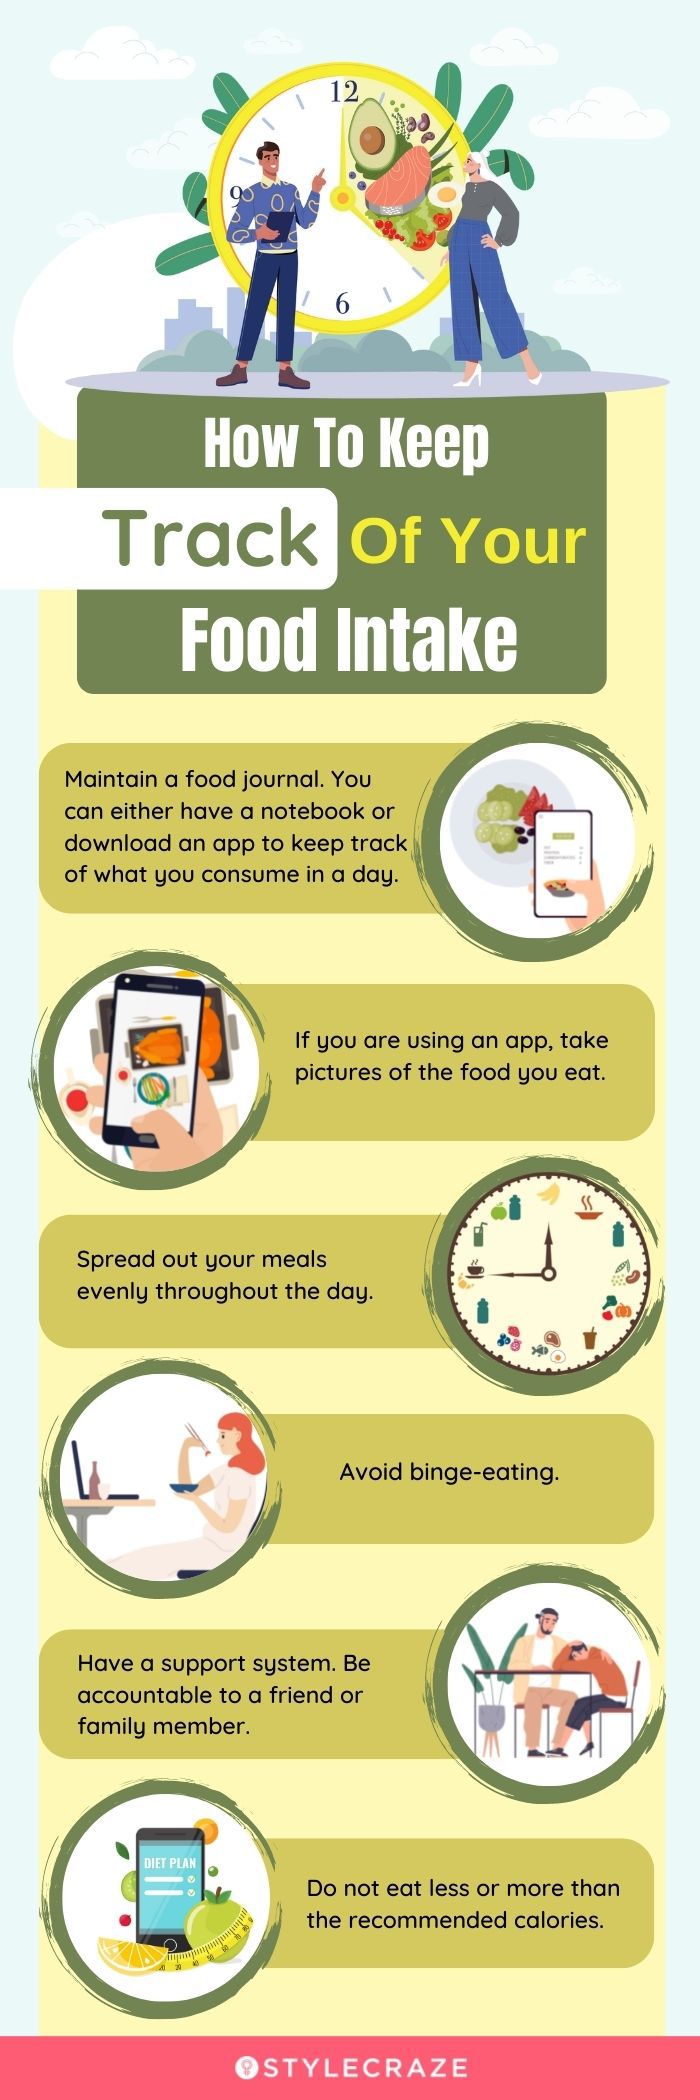 how to keep track of your food intake [infographic]